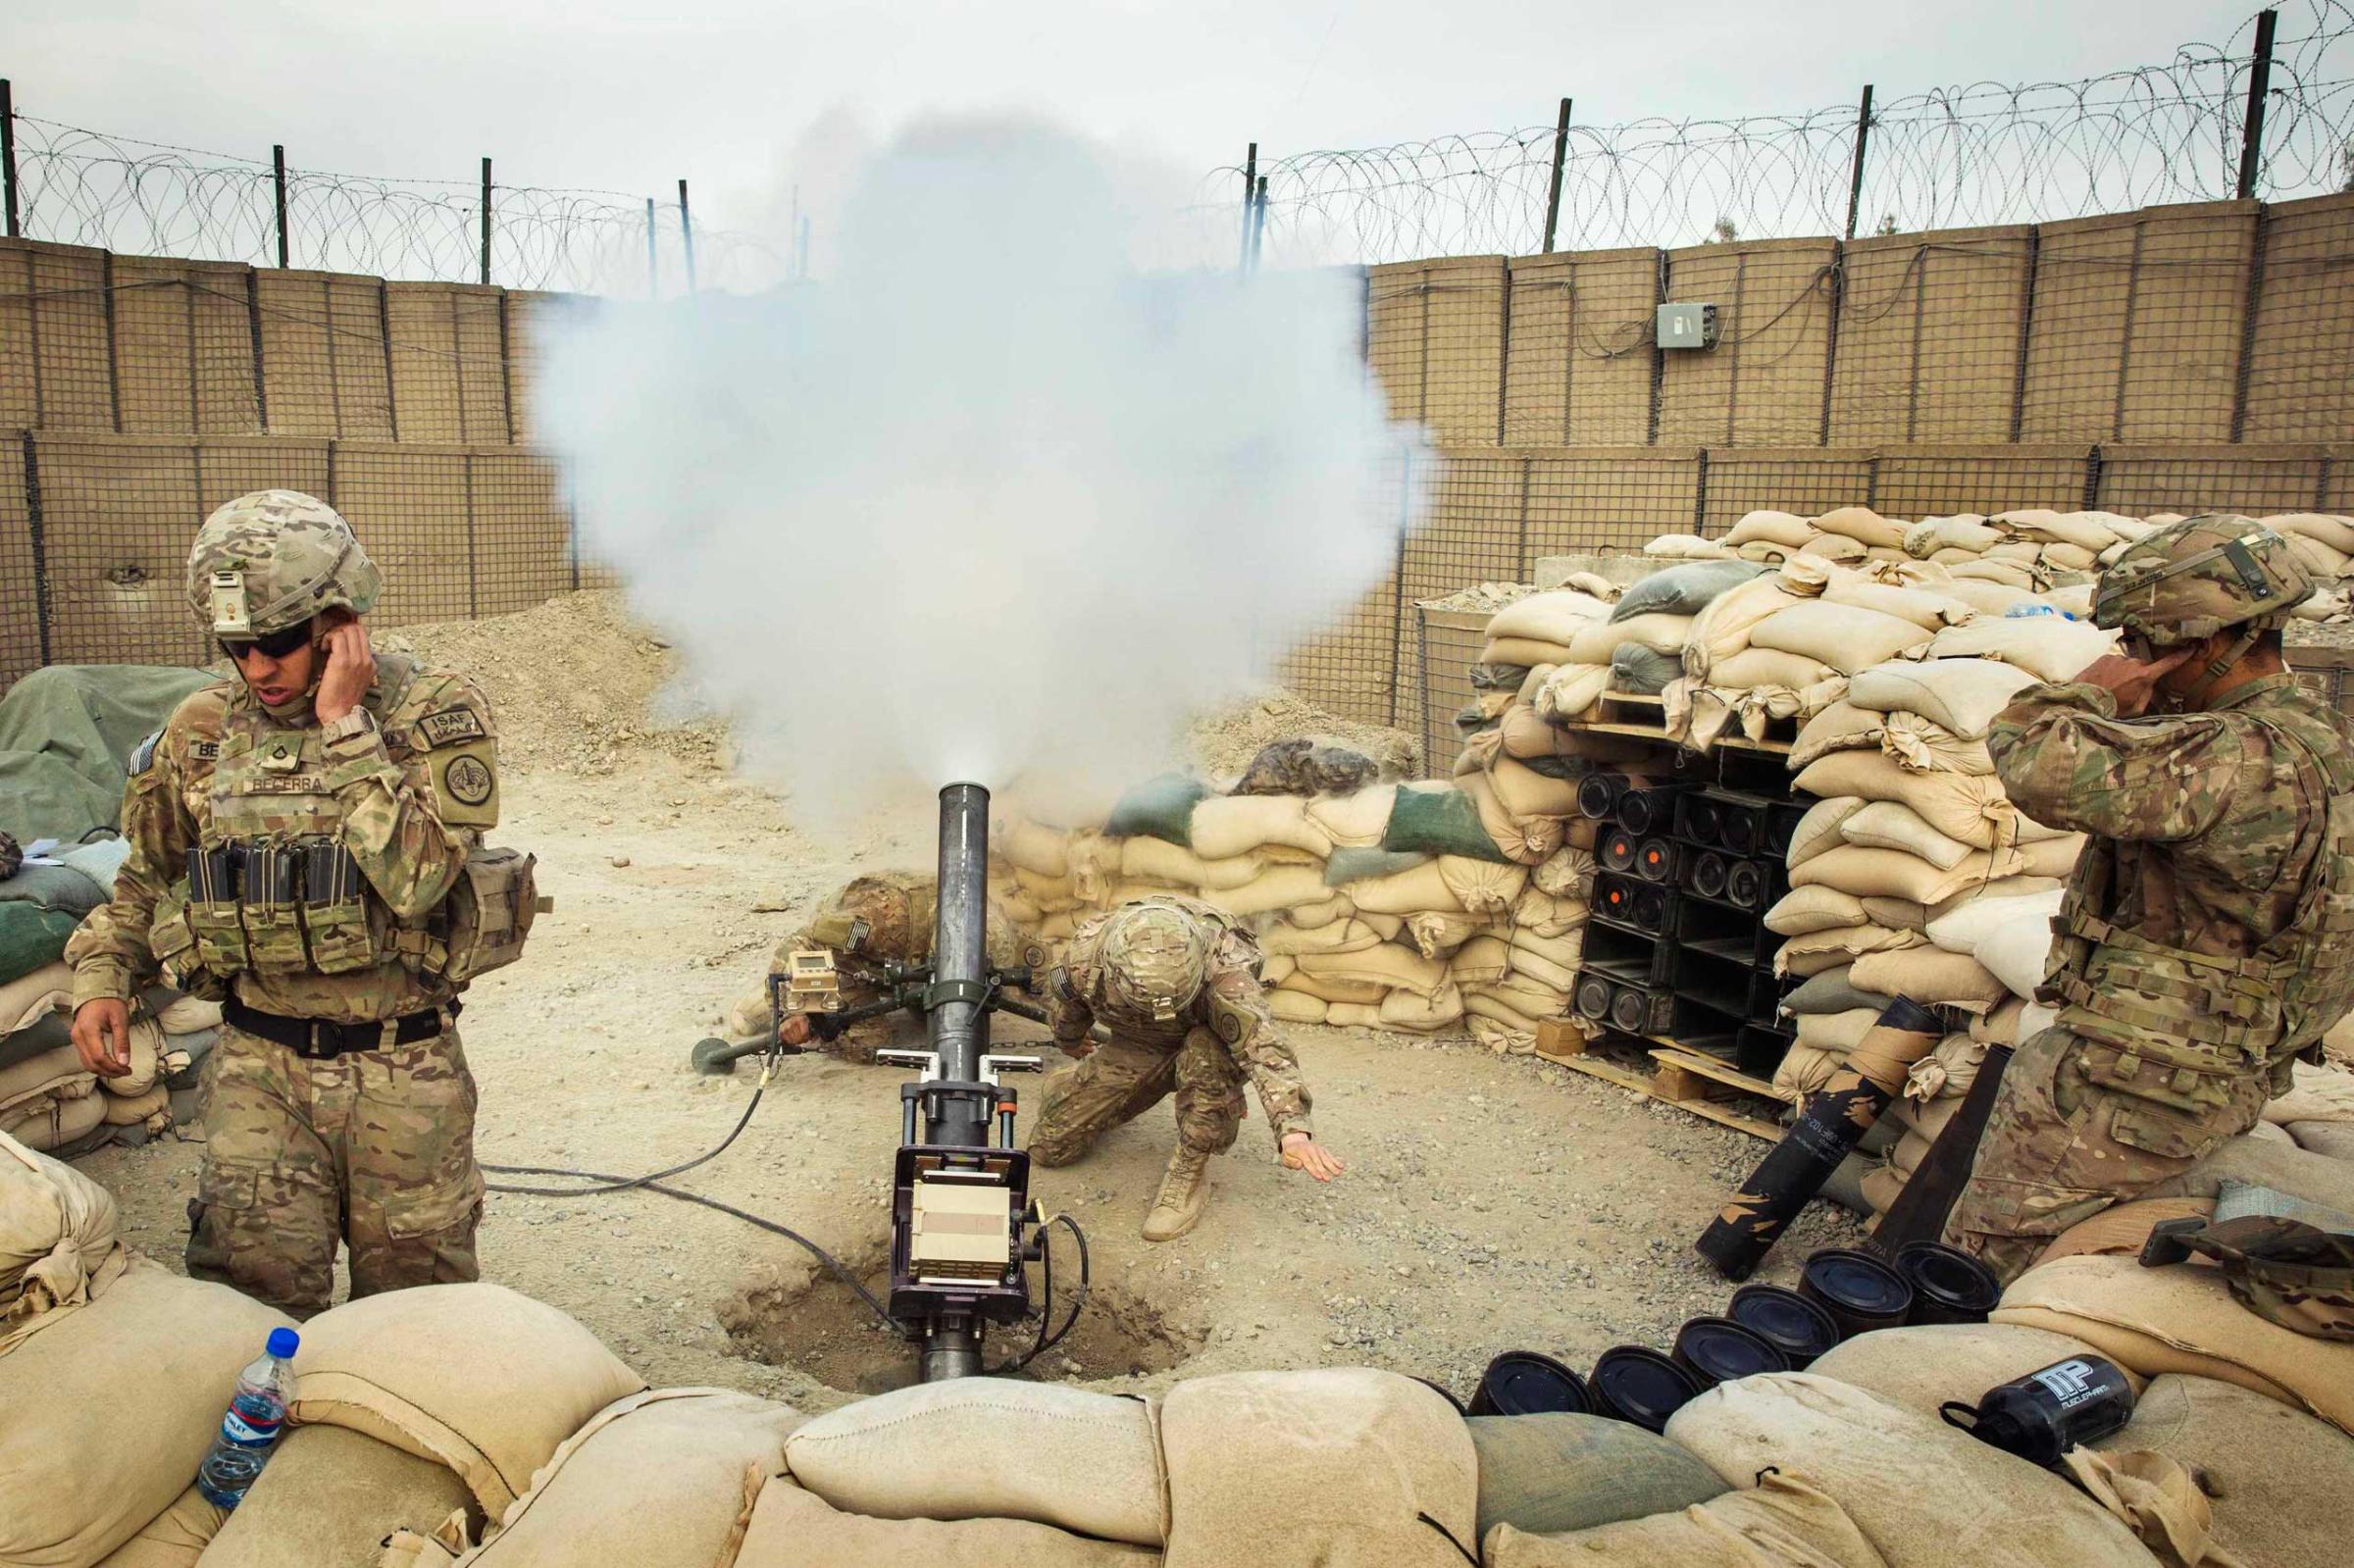 U.S. soldiers from the 3rd Cavalry Regiment fire a 120mm mortar during an exercise on forward operating base Gamberi in the Laghman province of Afghanistan